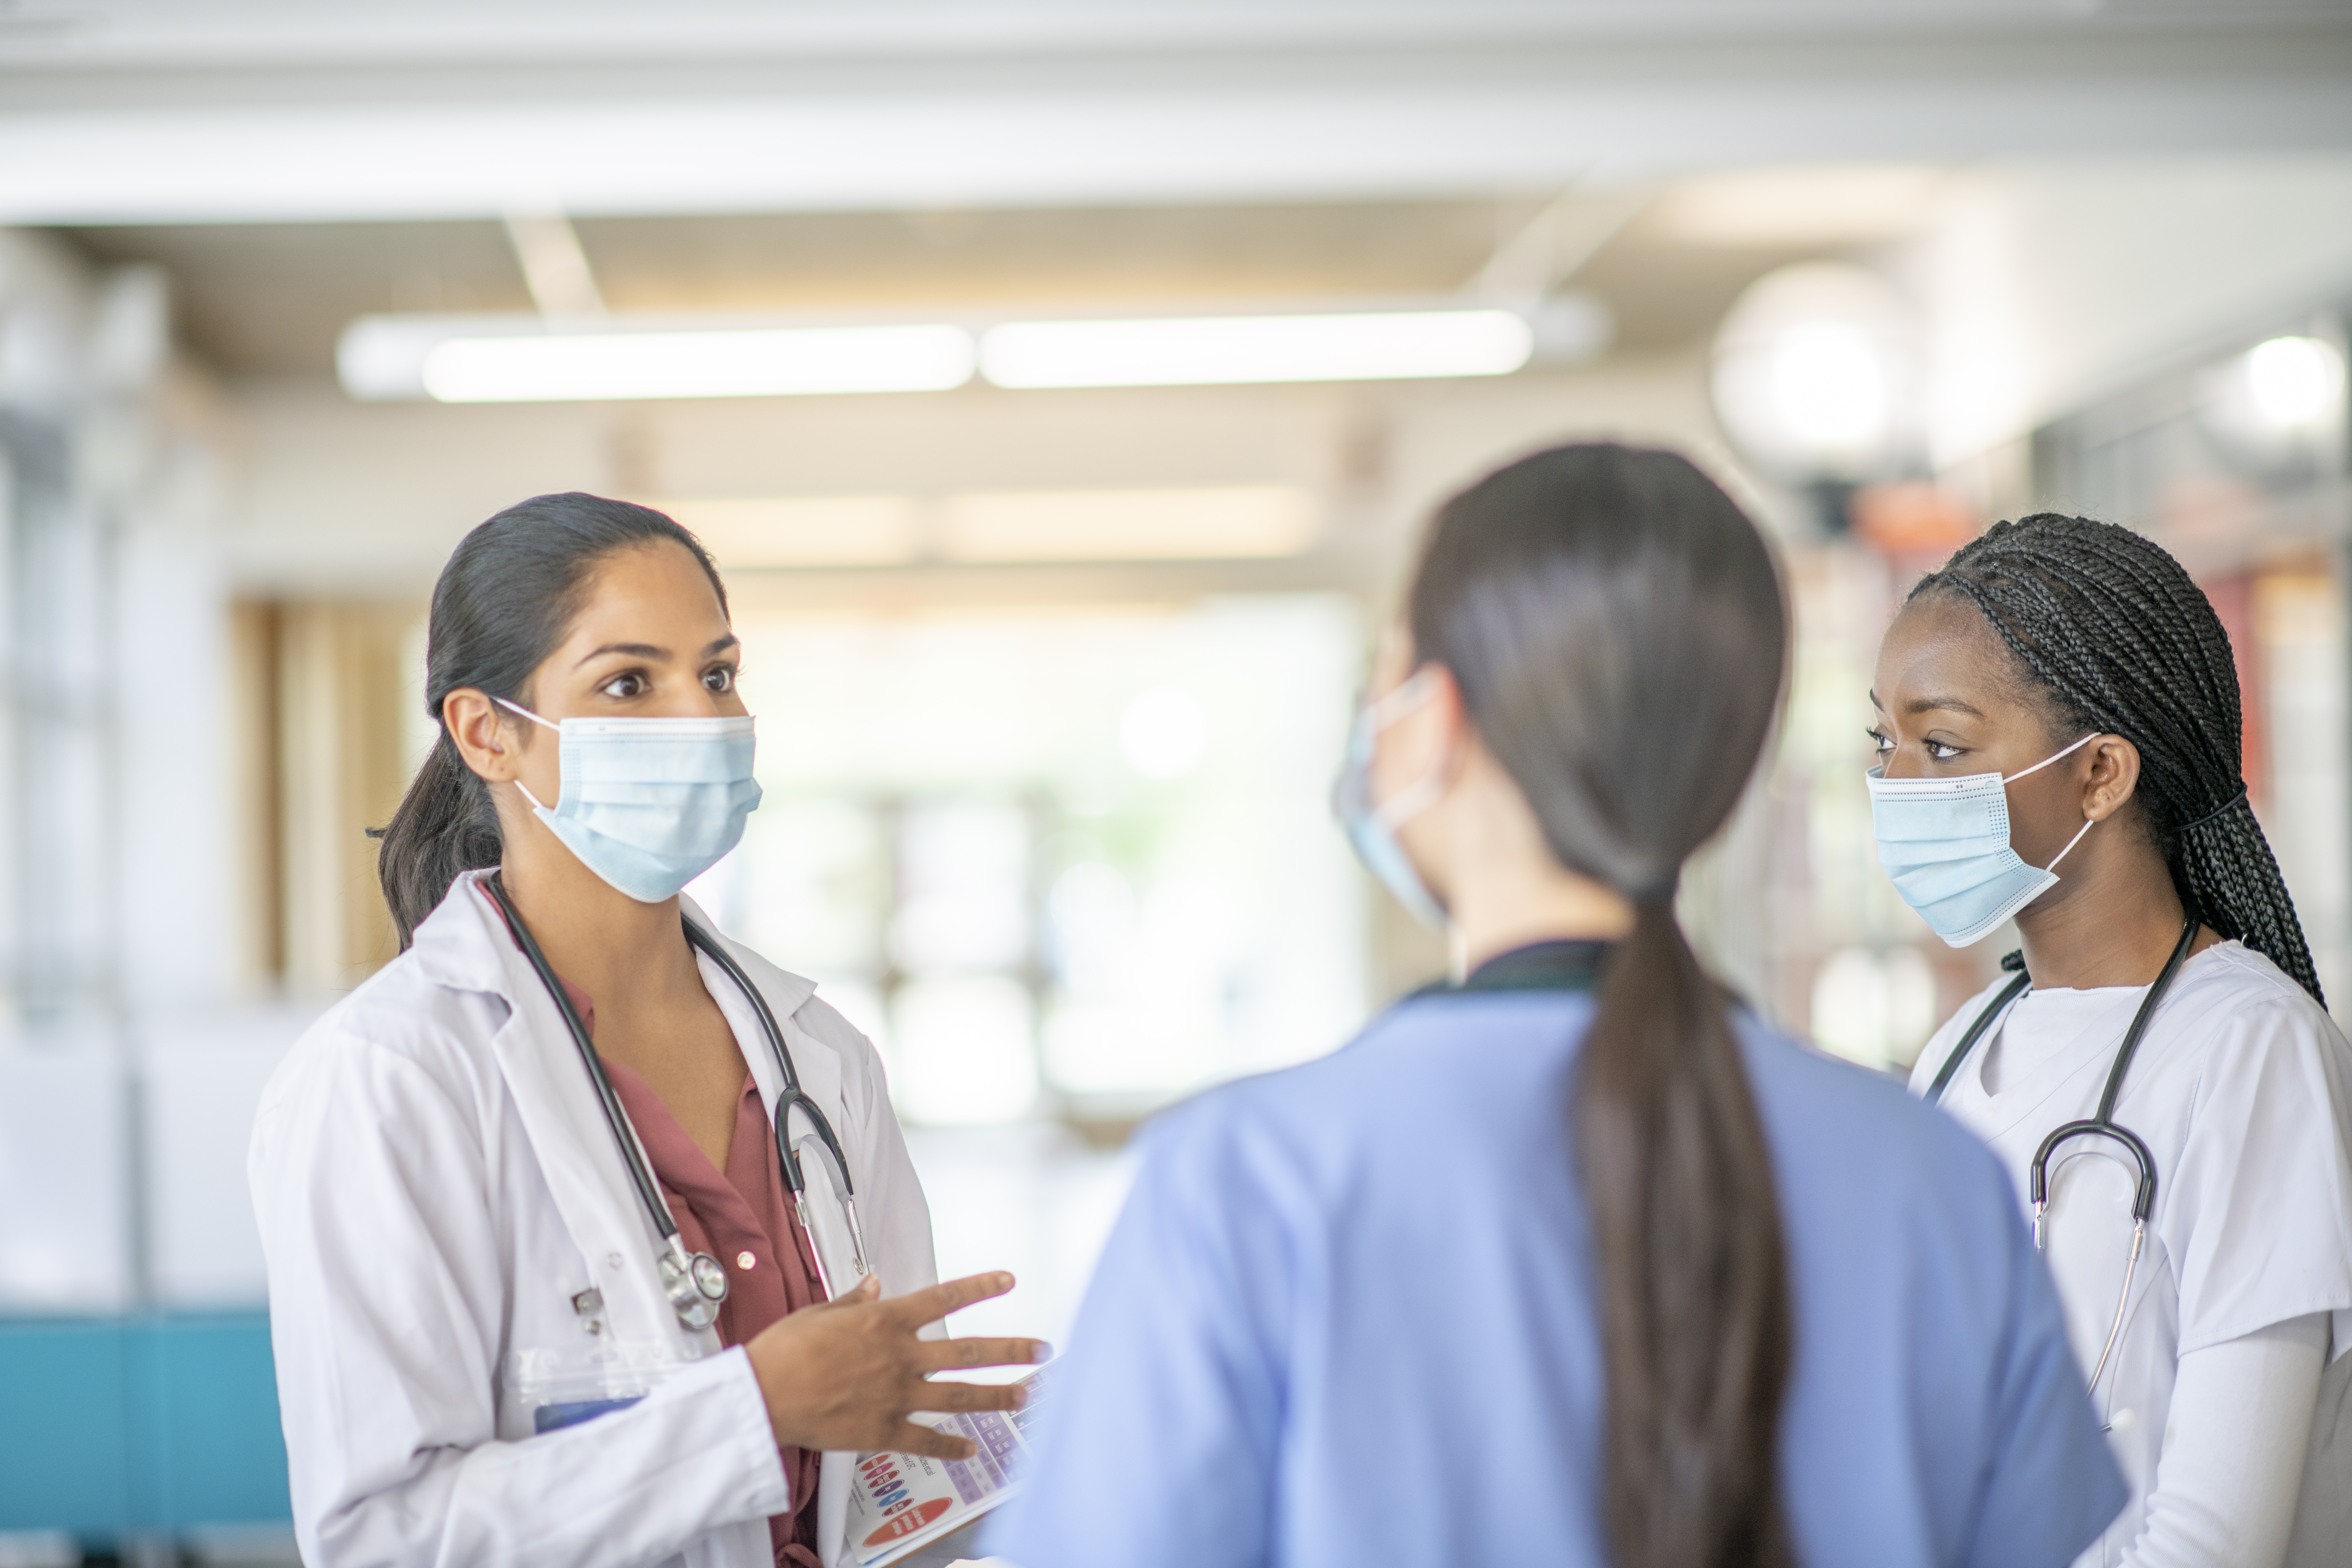 Three young health care workes in consultation, wearing PPE in a hospital setting.